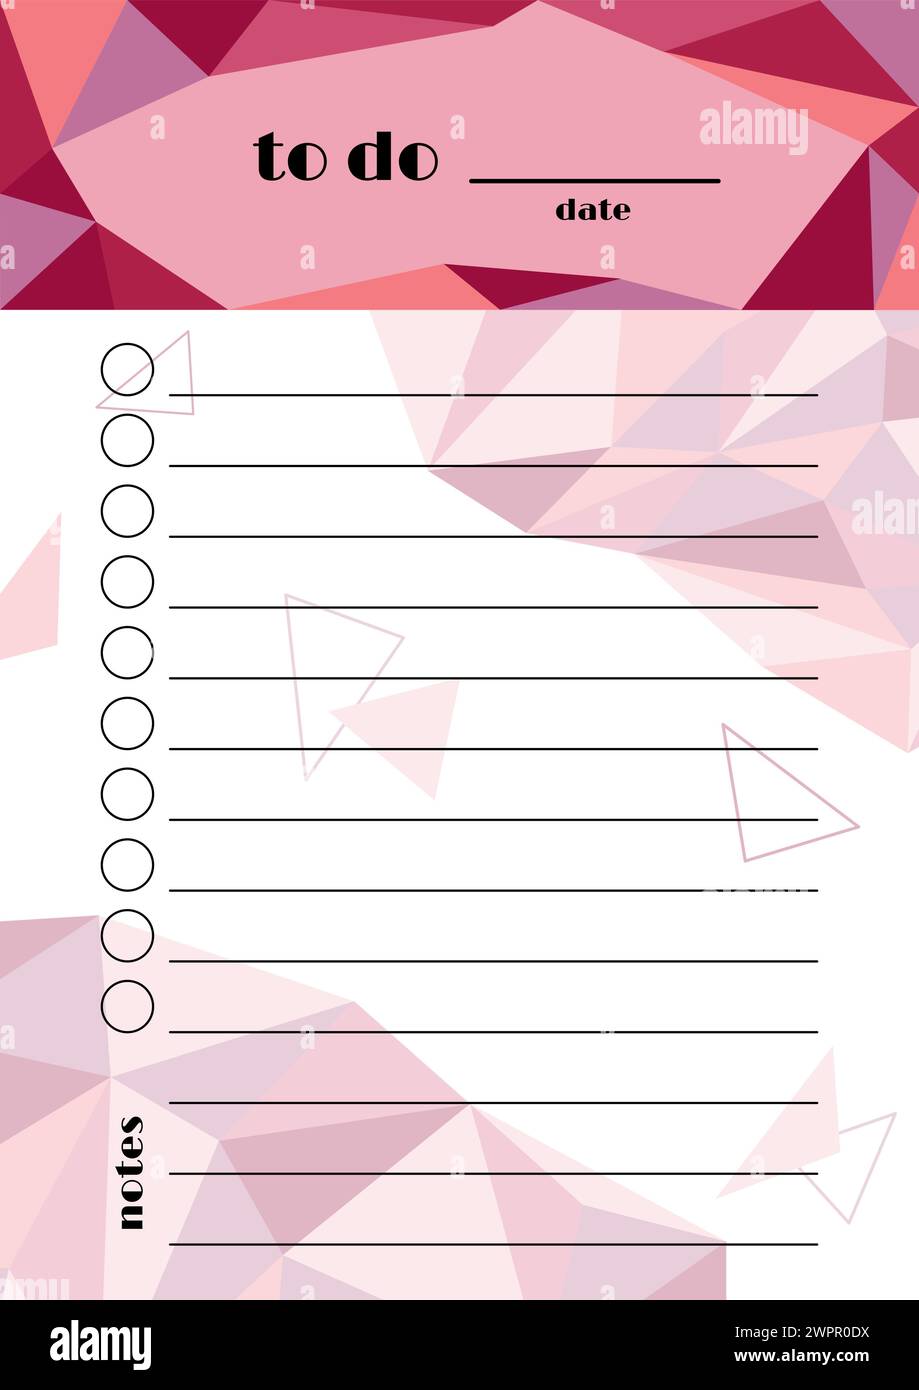 To do list template. Vector daily planner page. Polygonal geometric design background with colorful triangle elements. A5 size design for notebooks Stock Vector